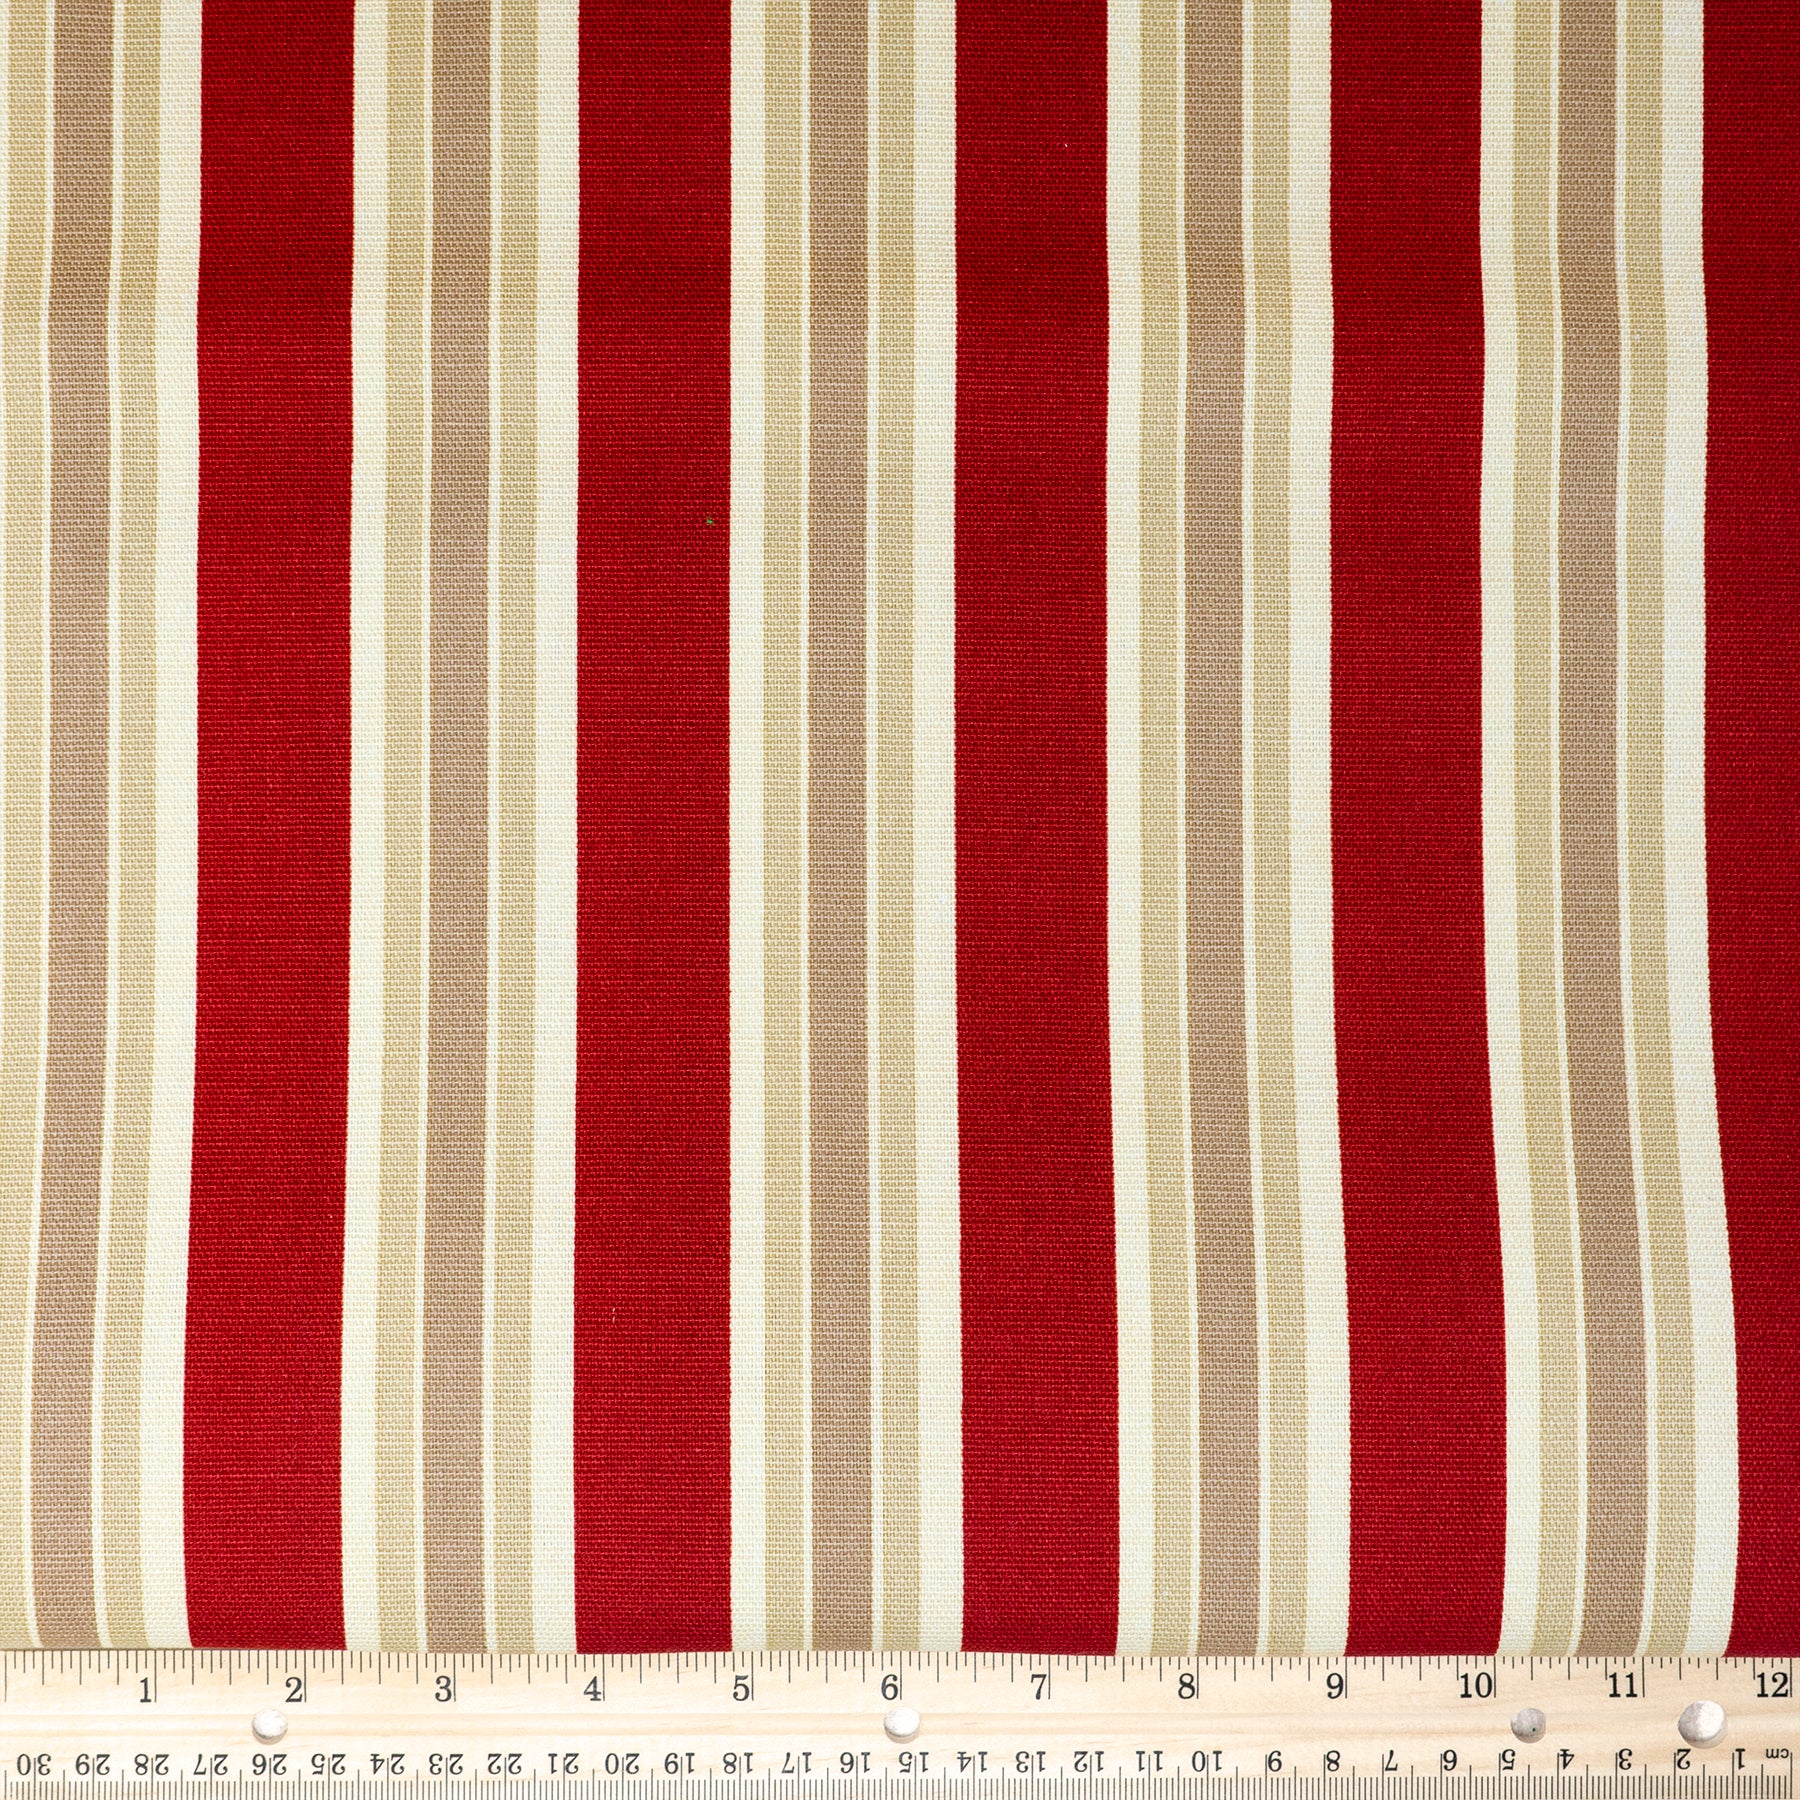 Waverly Inspirations 100% Cotton Duck 45" Width Large Stripe Antique Color Sewing Fabric by the Yard